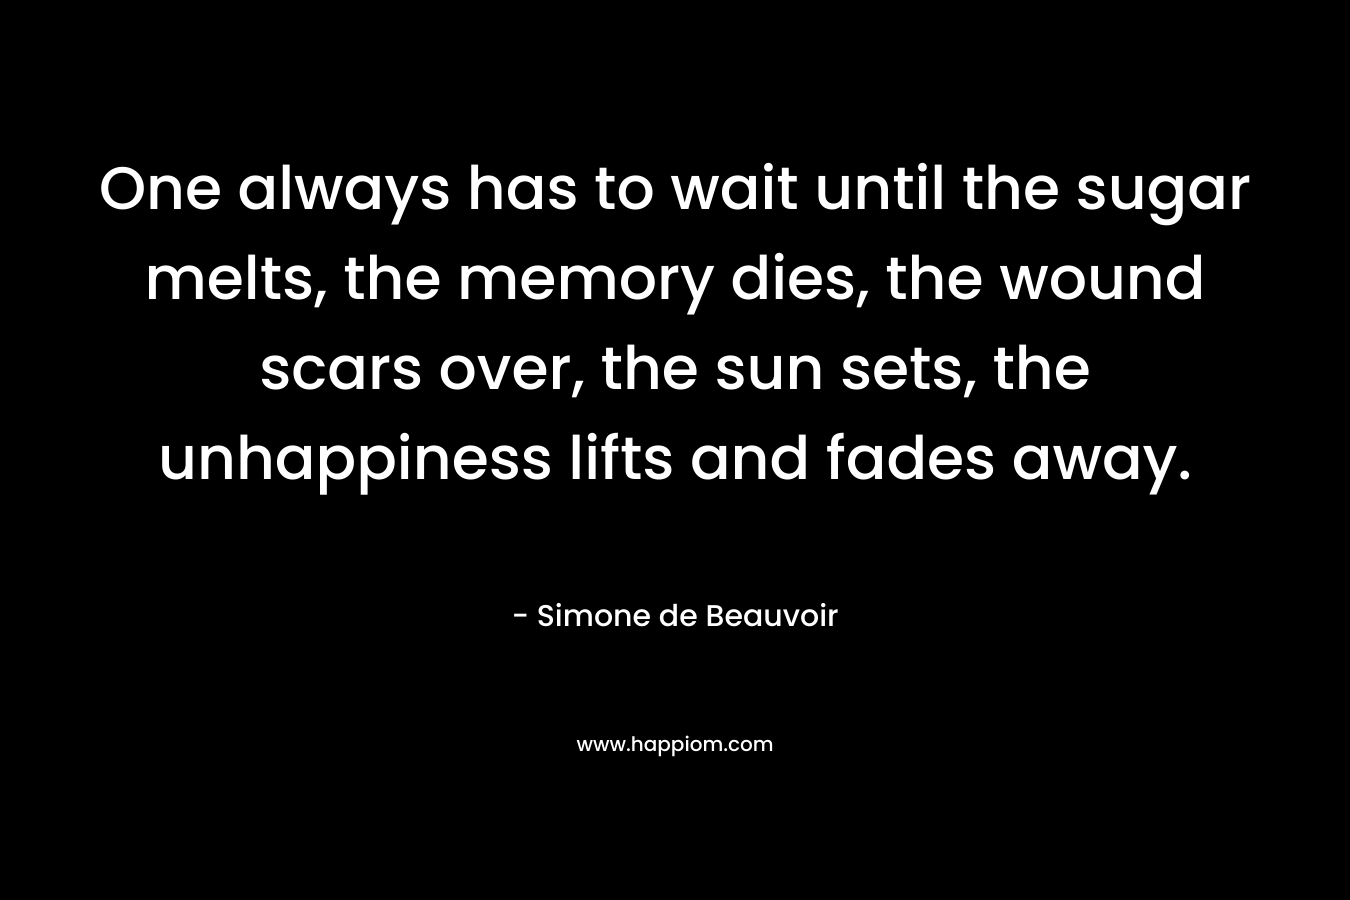 One always has to wait until the sugar melts, the memory dies, the wound scars over, the sun sets, the unhappiness lifts and fades away. – Simone de Beauvoir